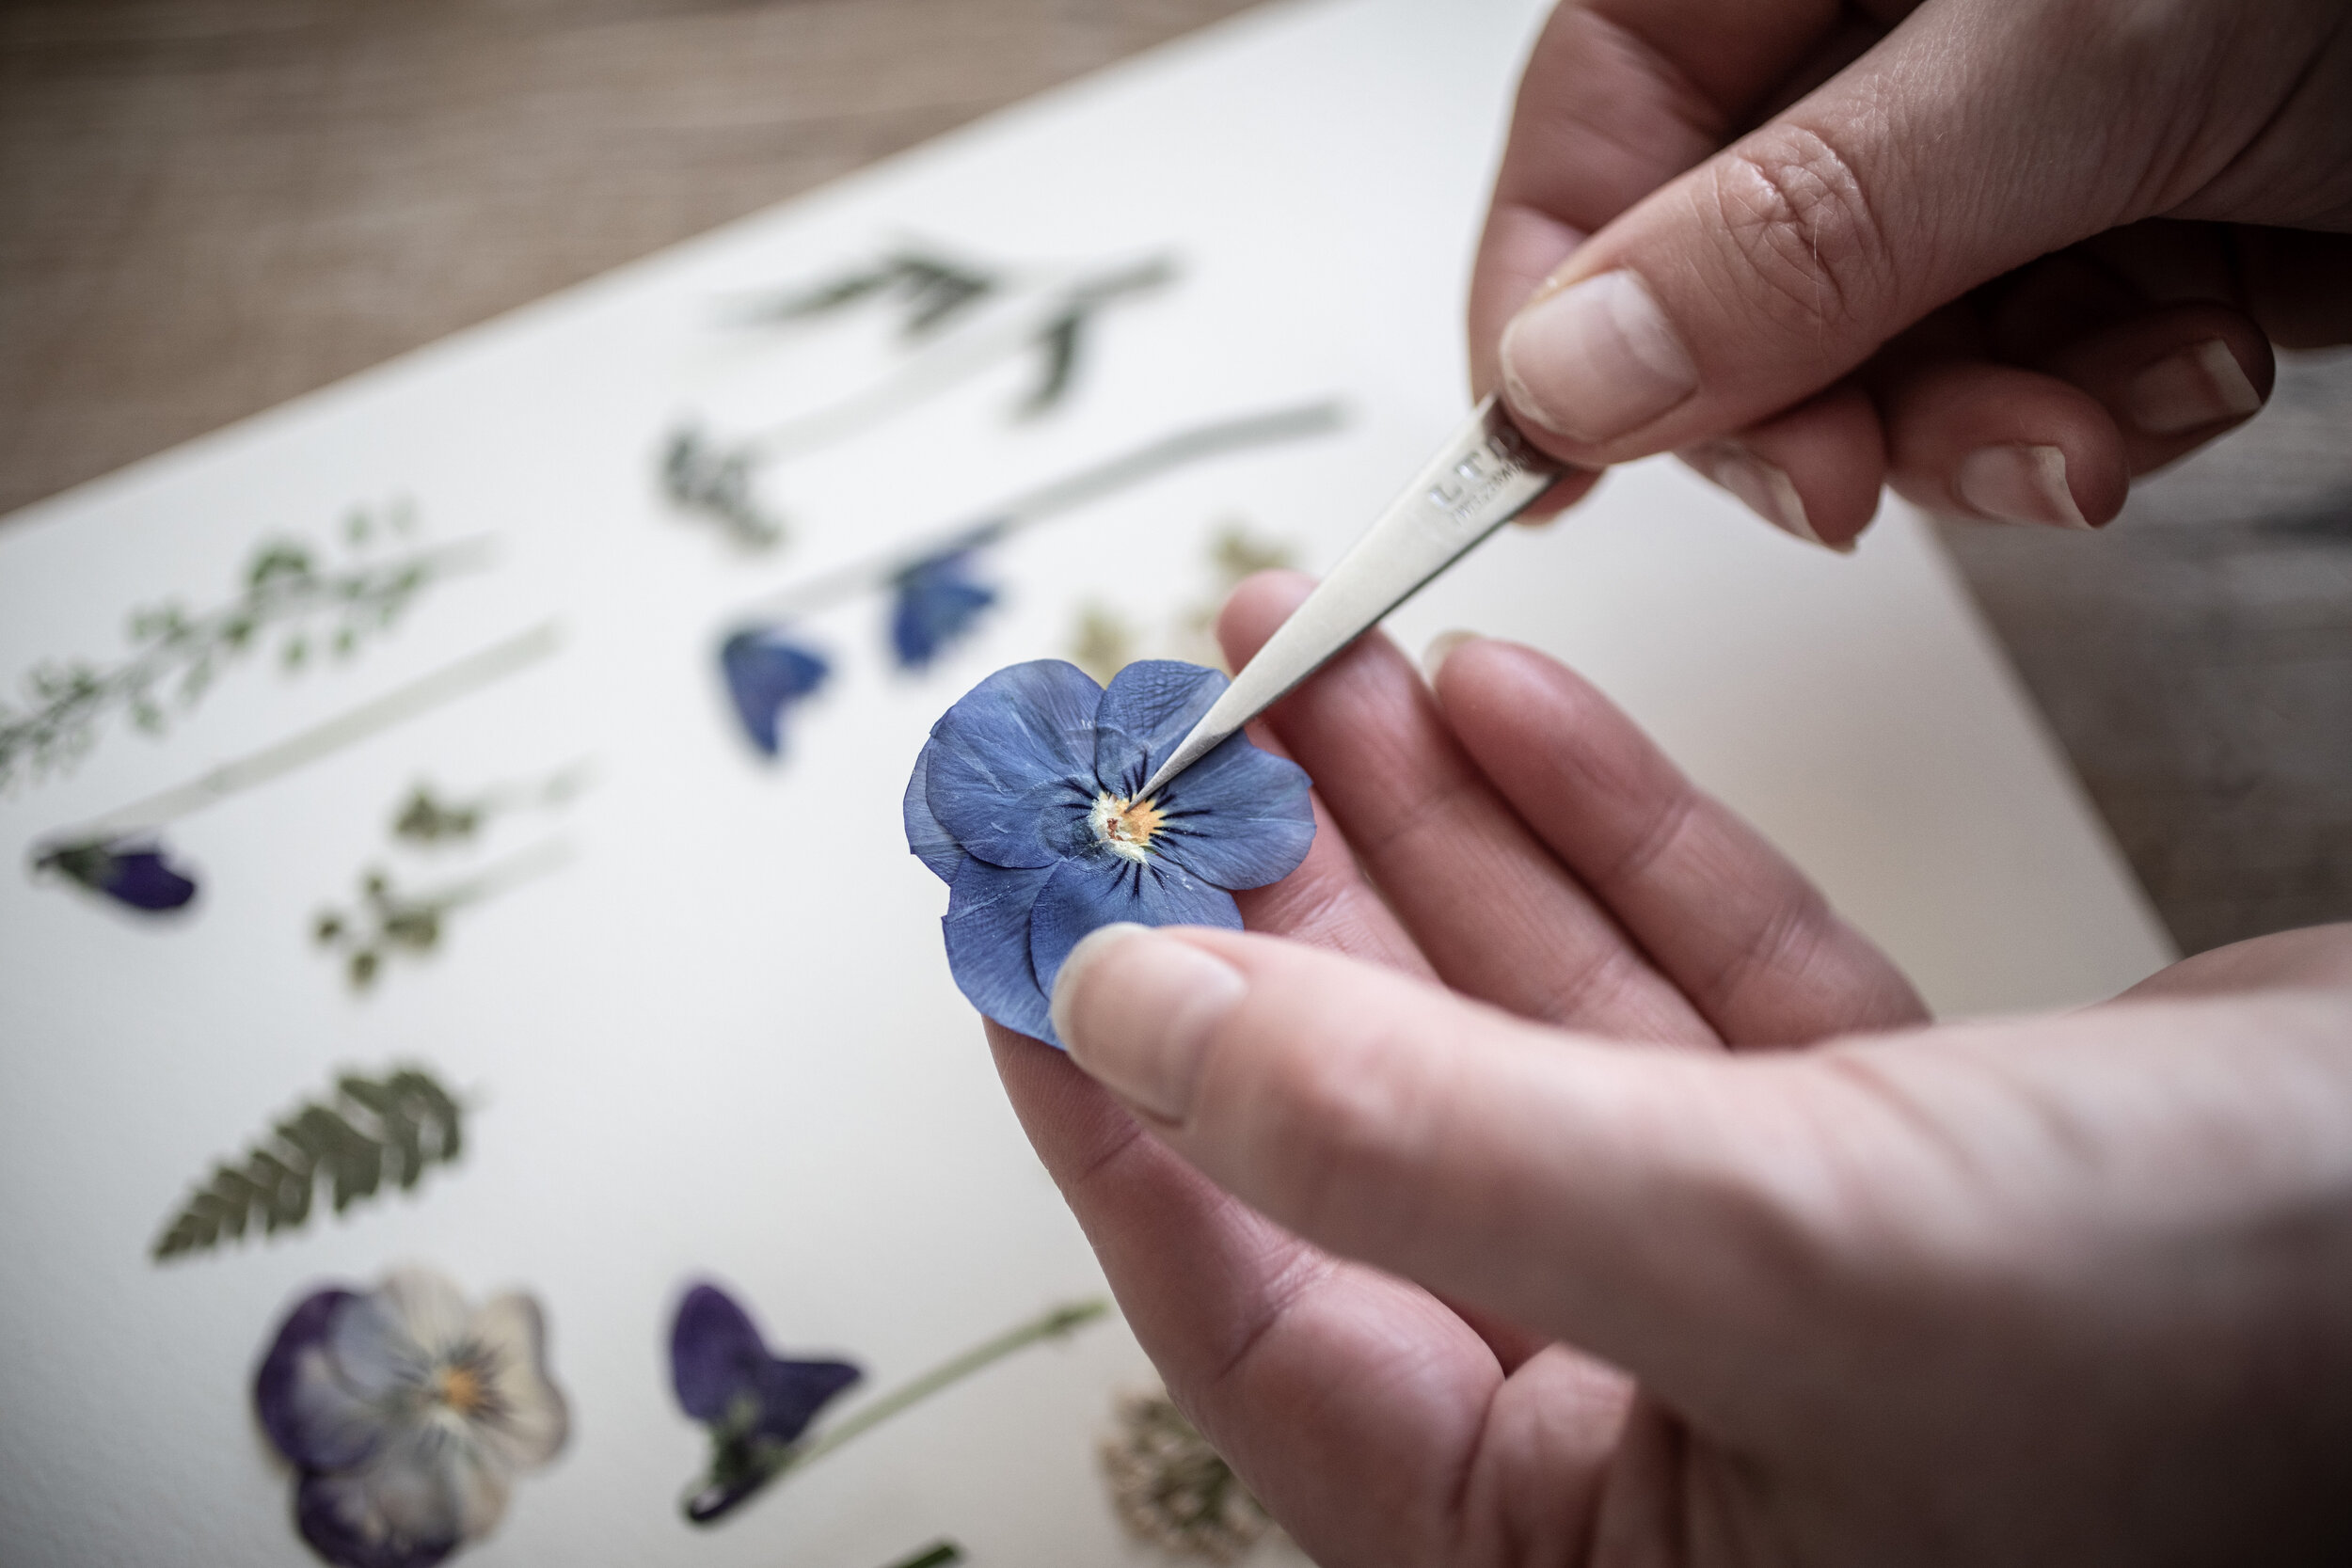 creating art from pressed flowers